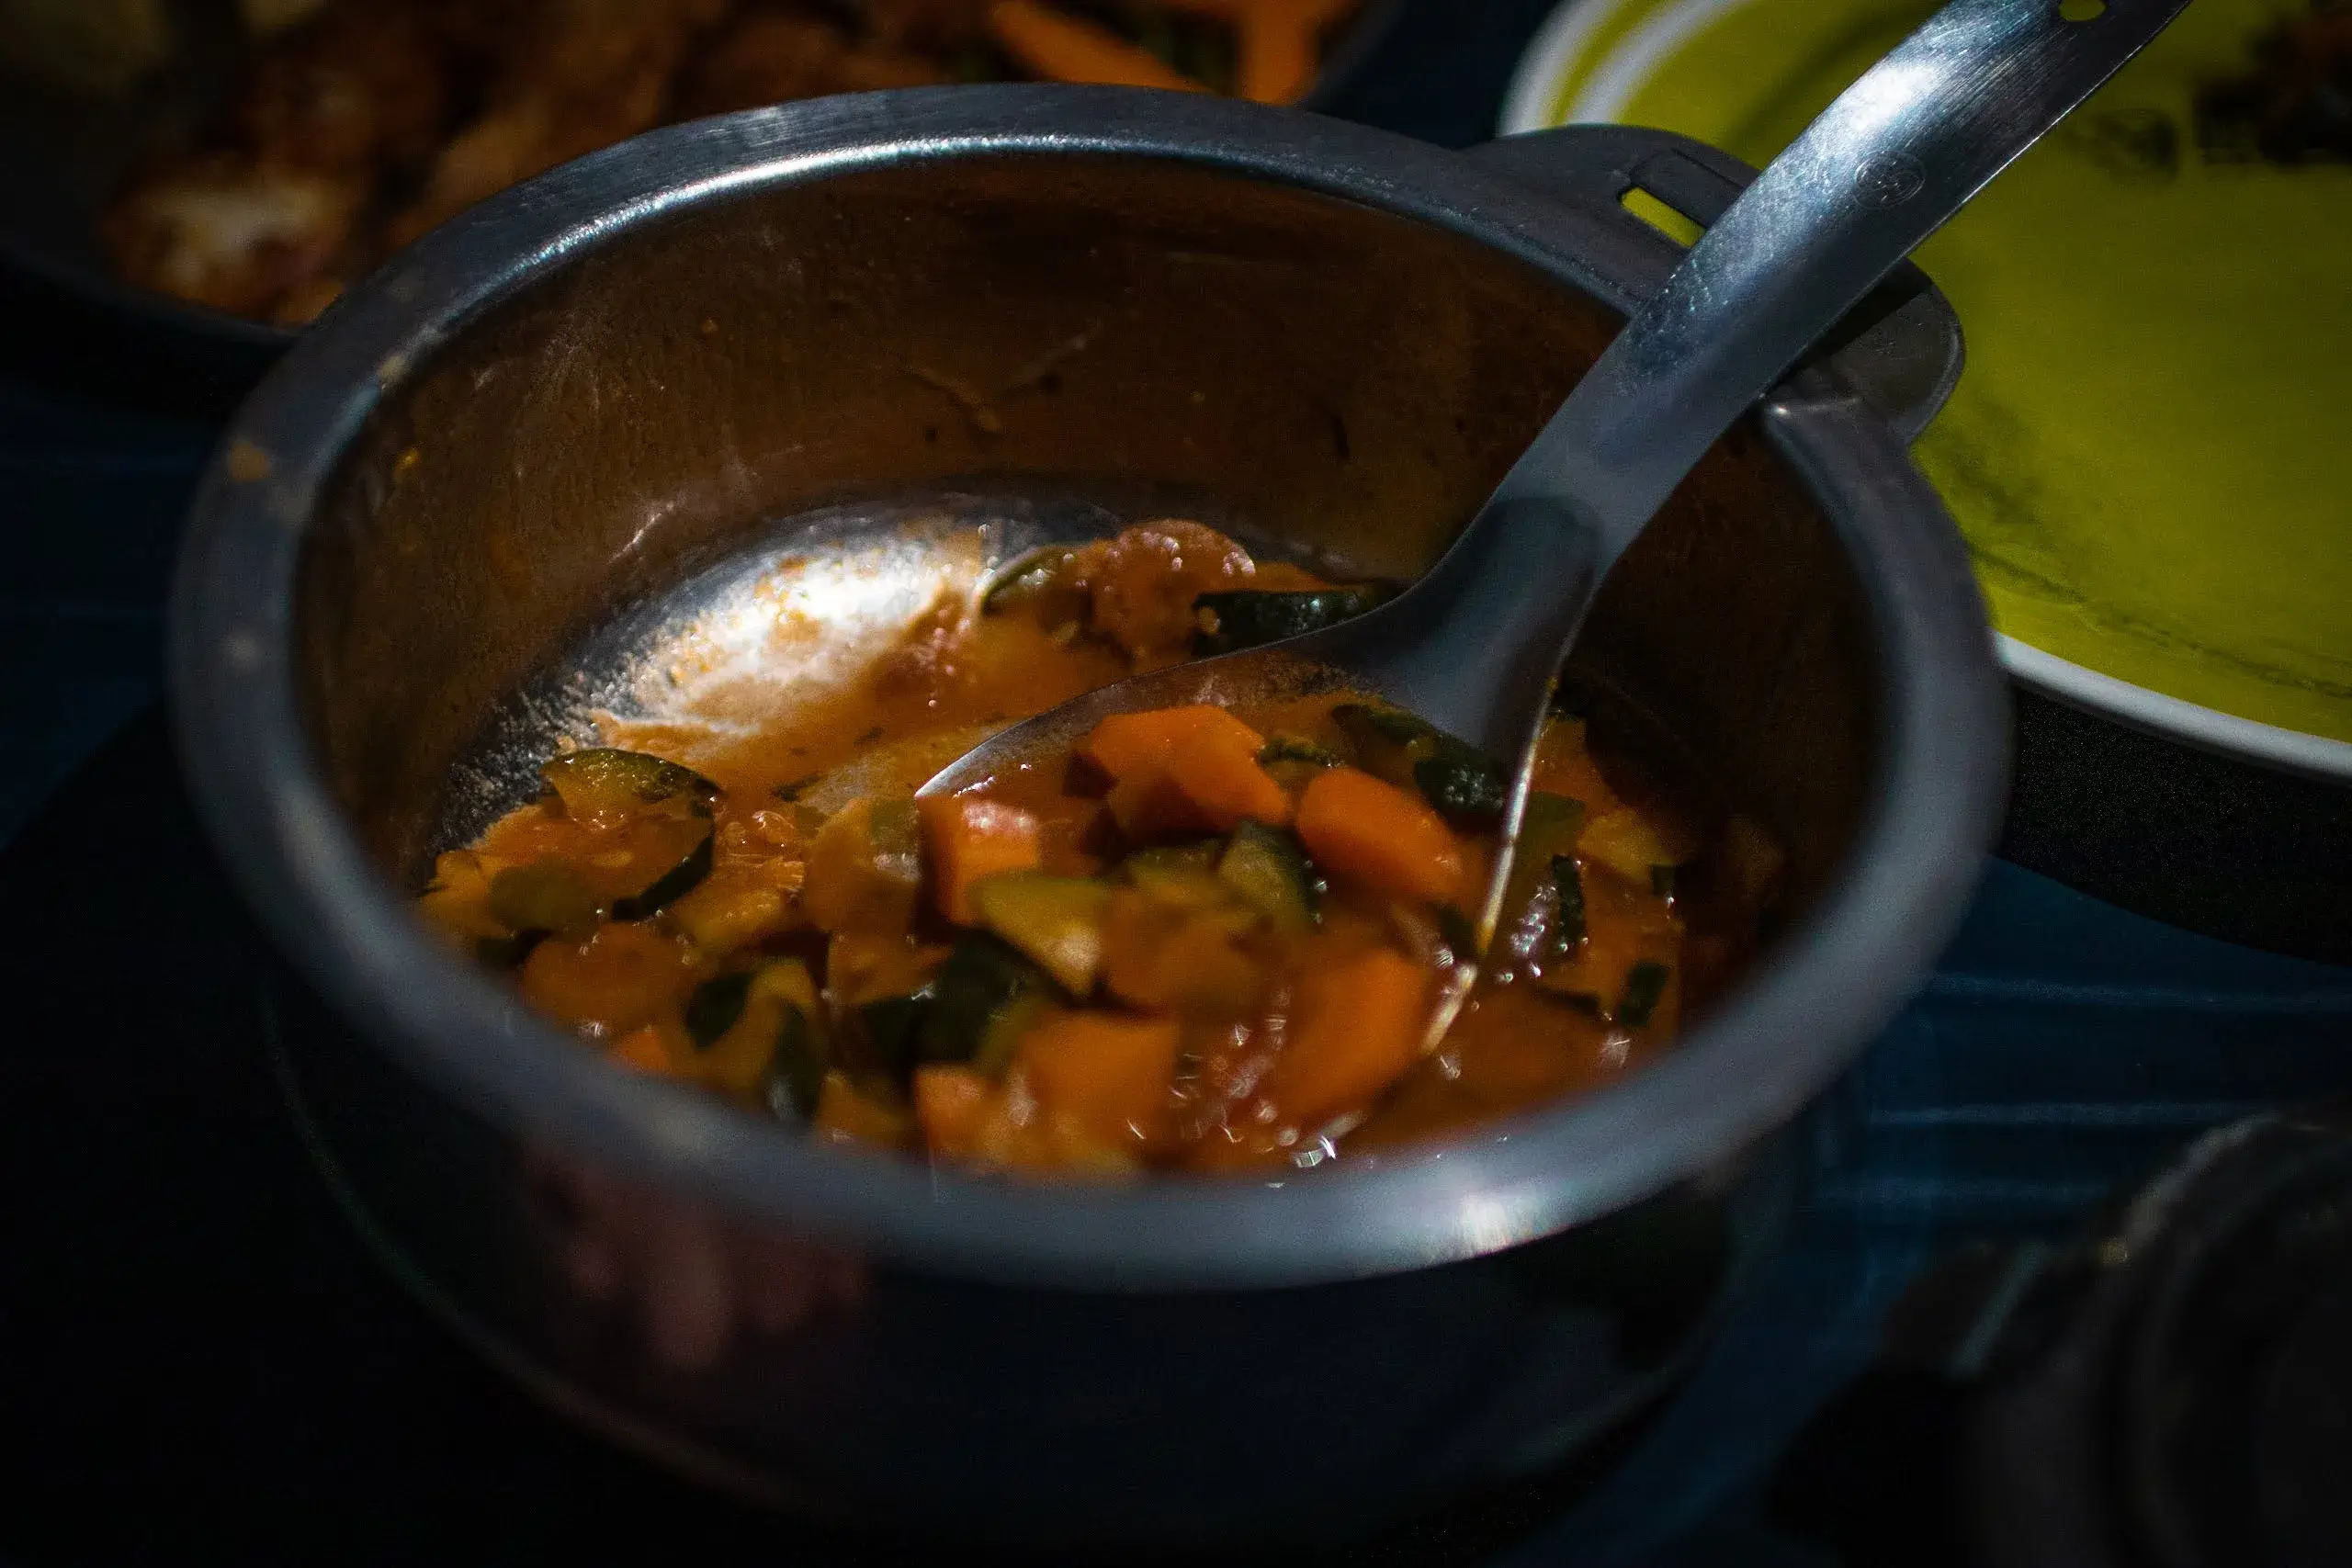 Vegetable soup provided for our travelers while trekking Kilimanjaro